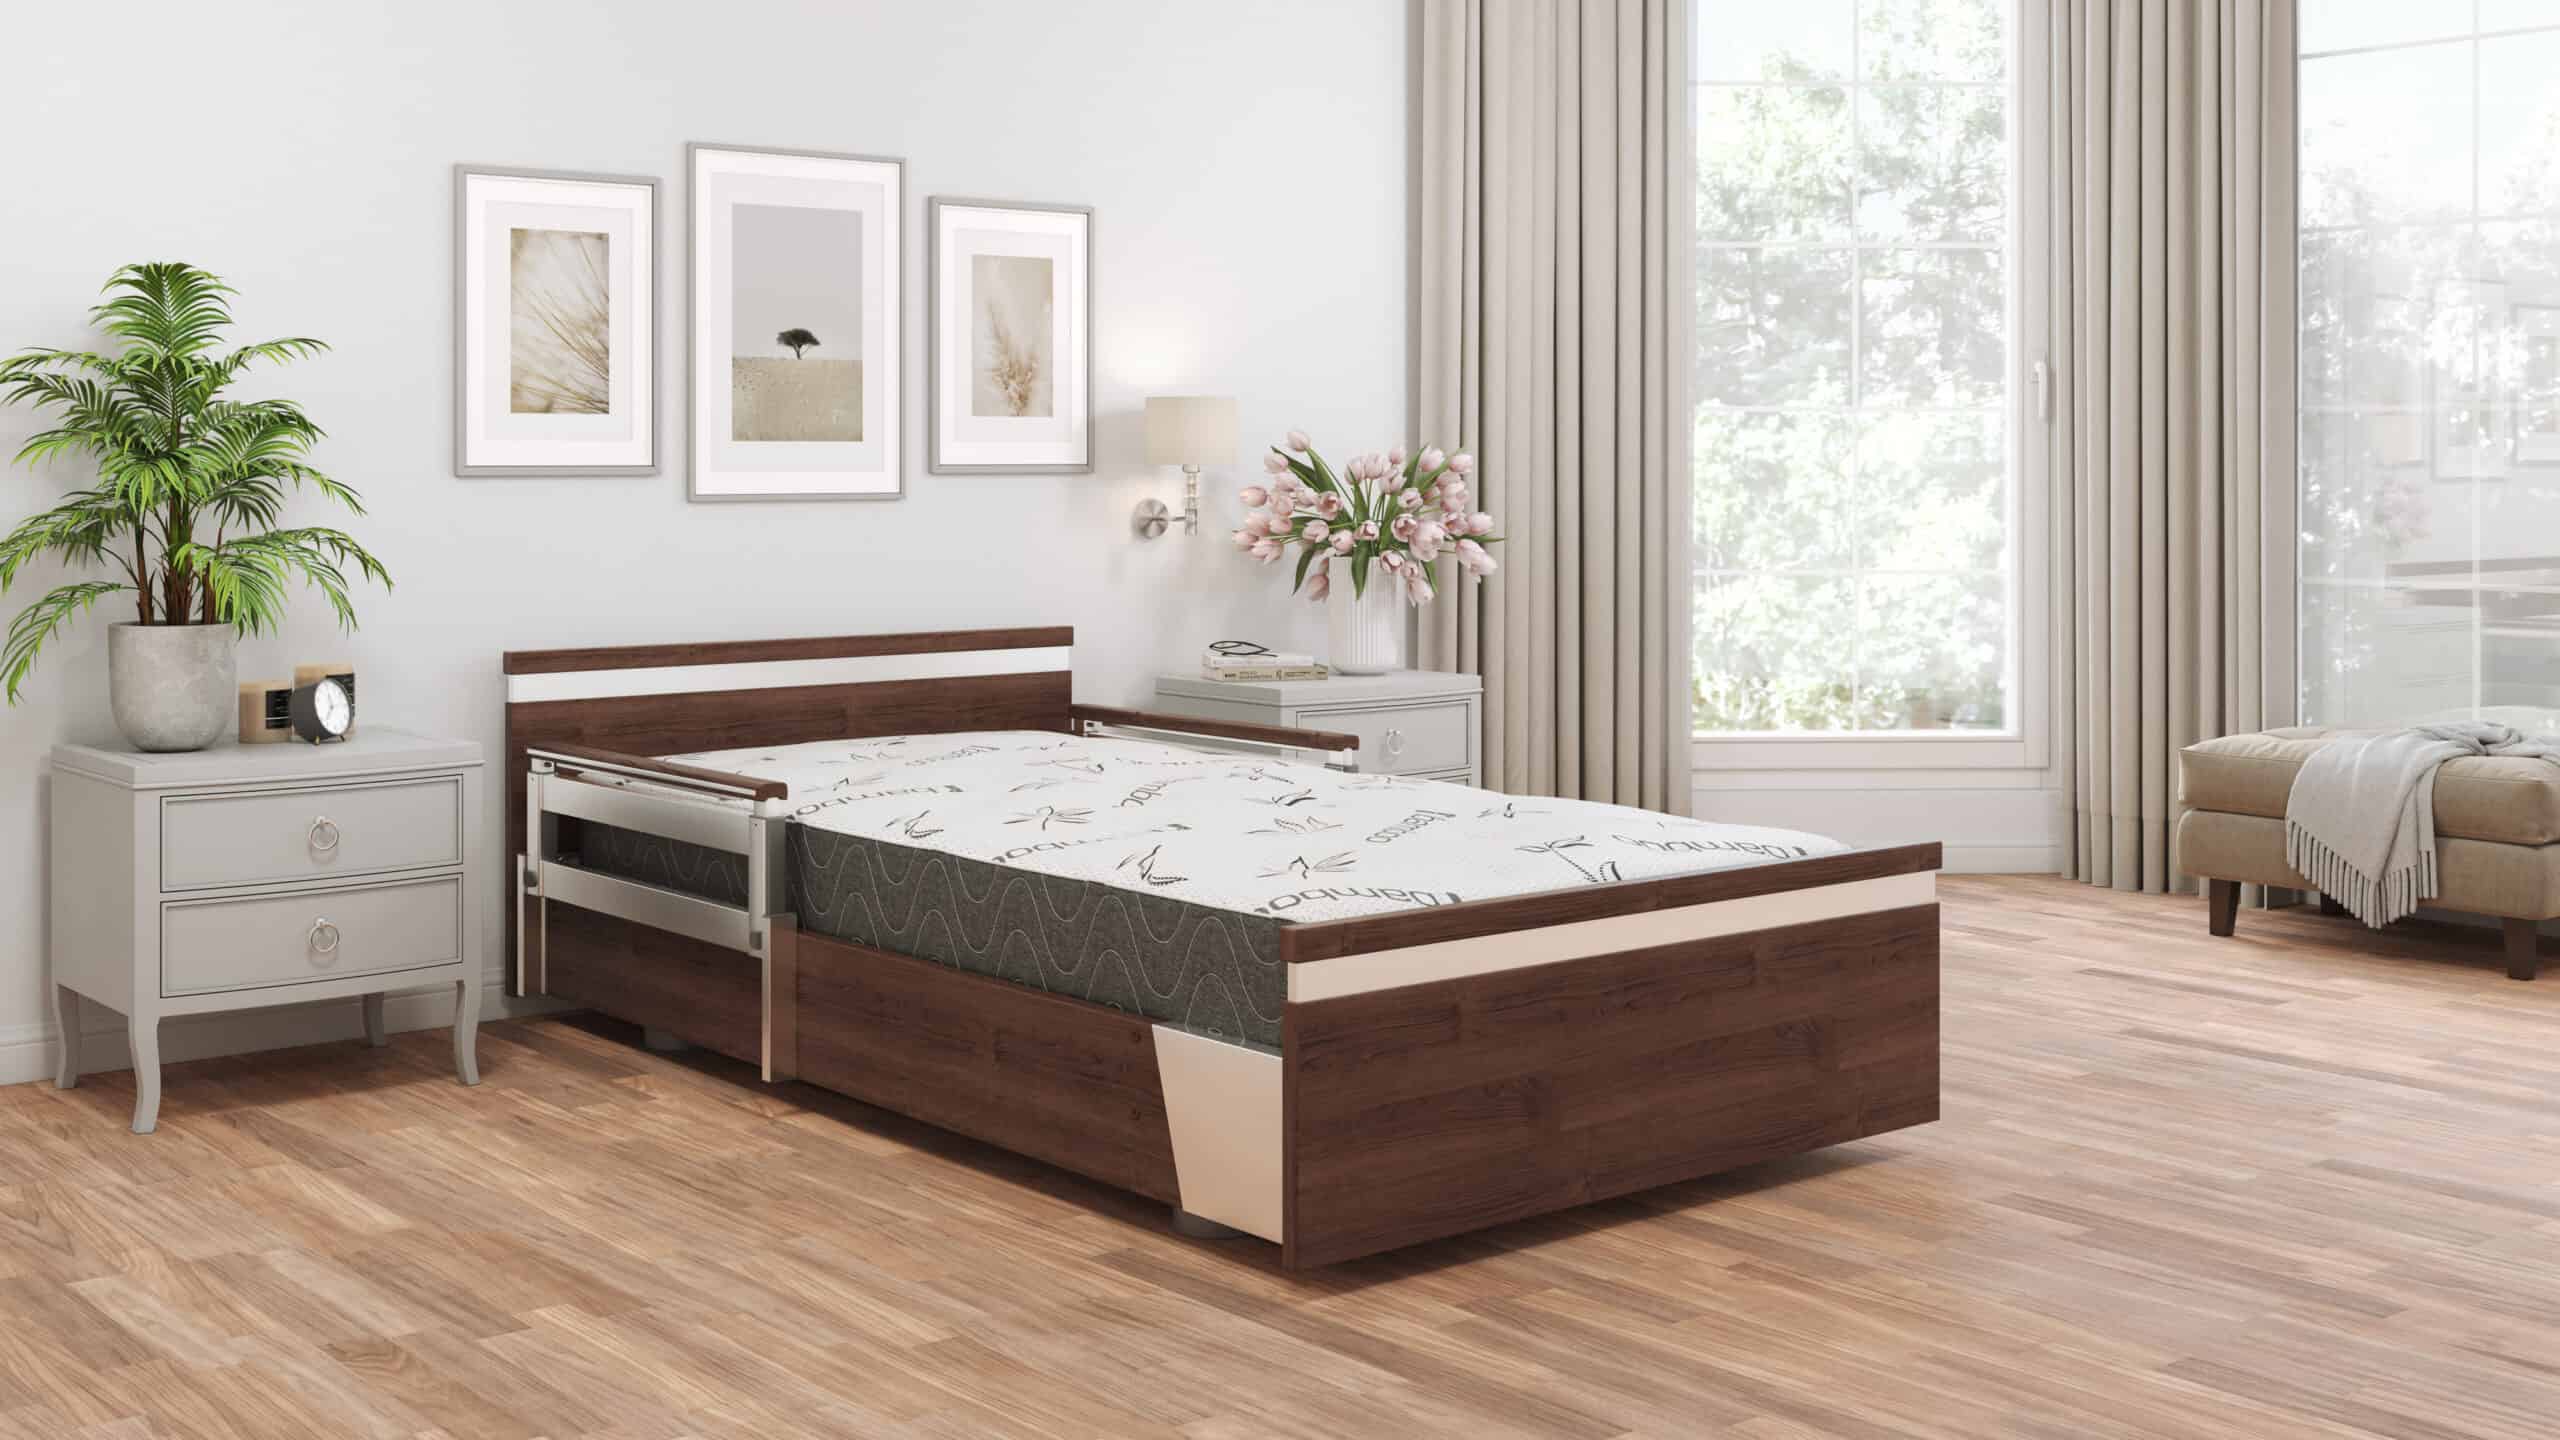 A bed in a room with hardwood floors.